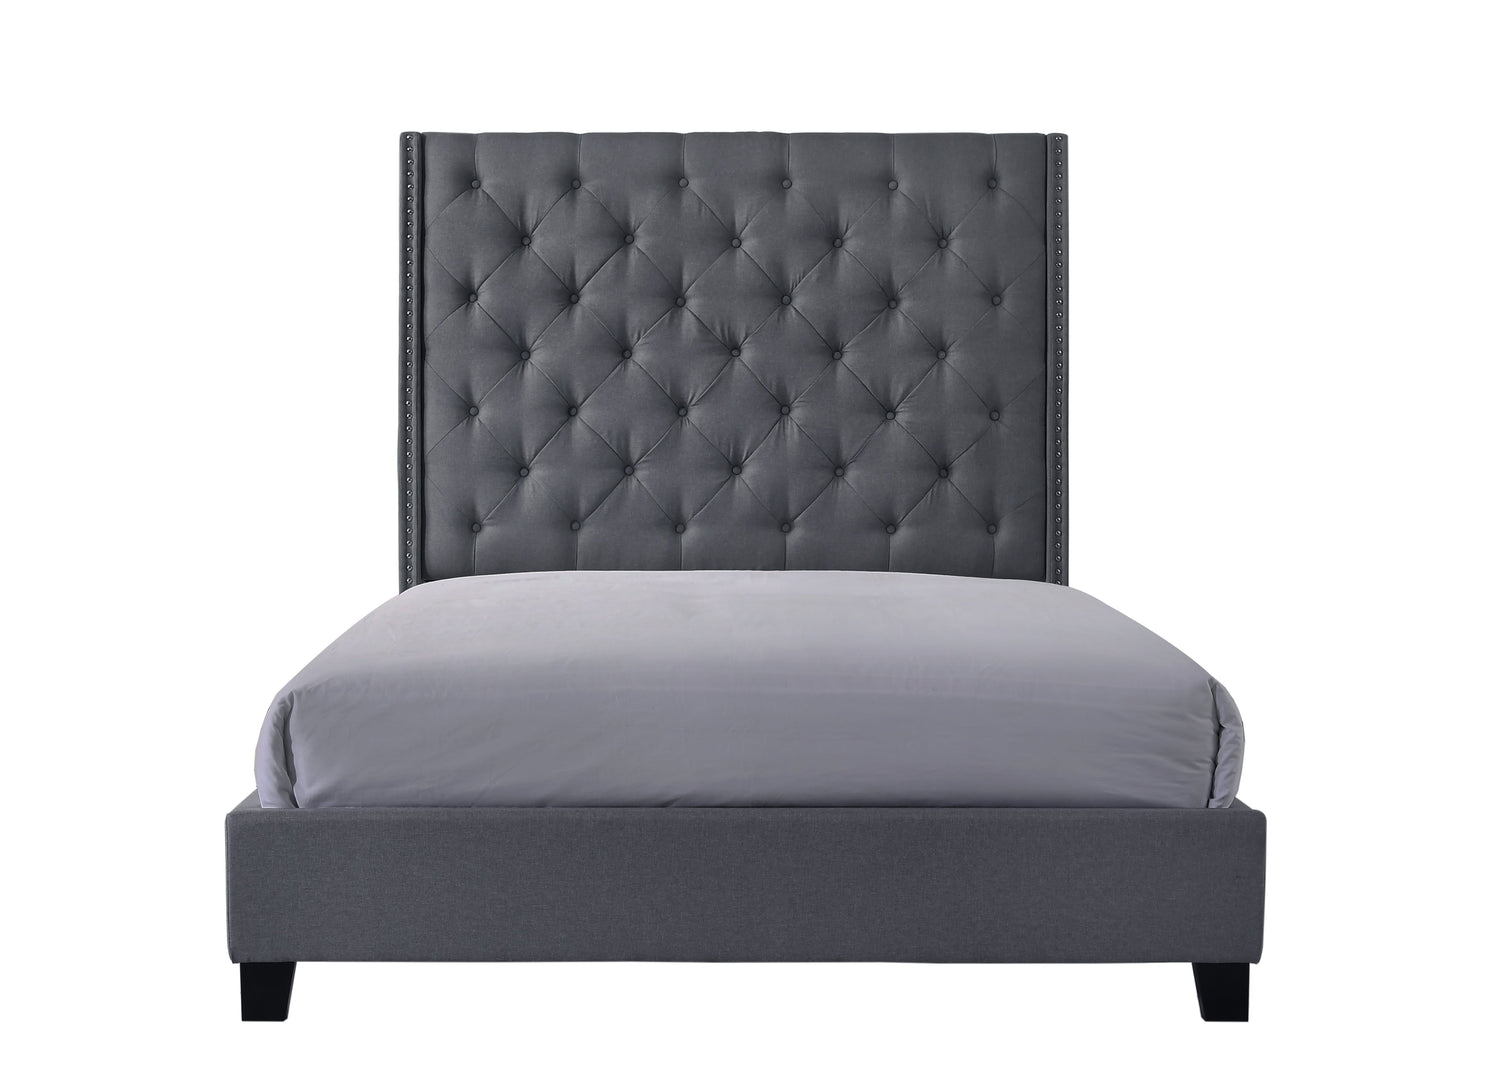 Chantilly Gray Queen Upholstered Bed - SET | 5265GY-Q-HB | 5265GY-Q-FRW - Bien Home Furniture &amp; Electronics